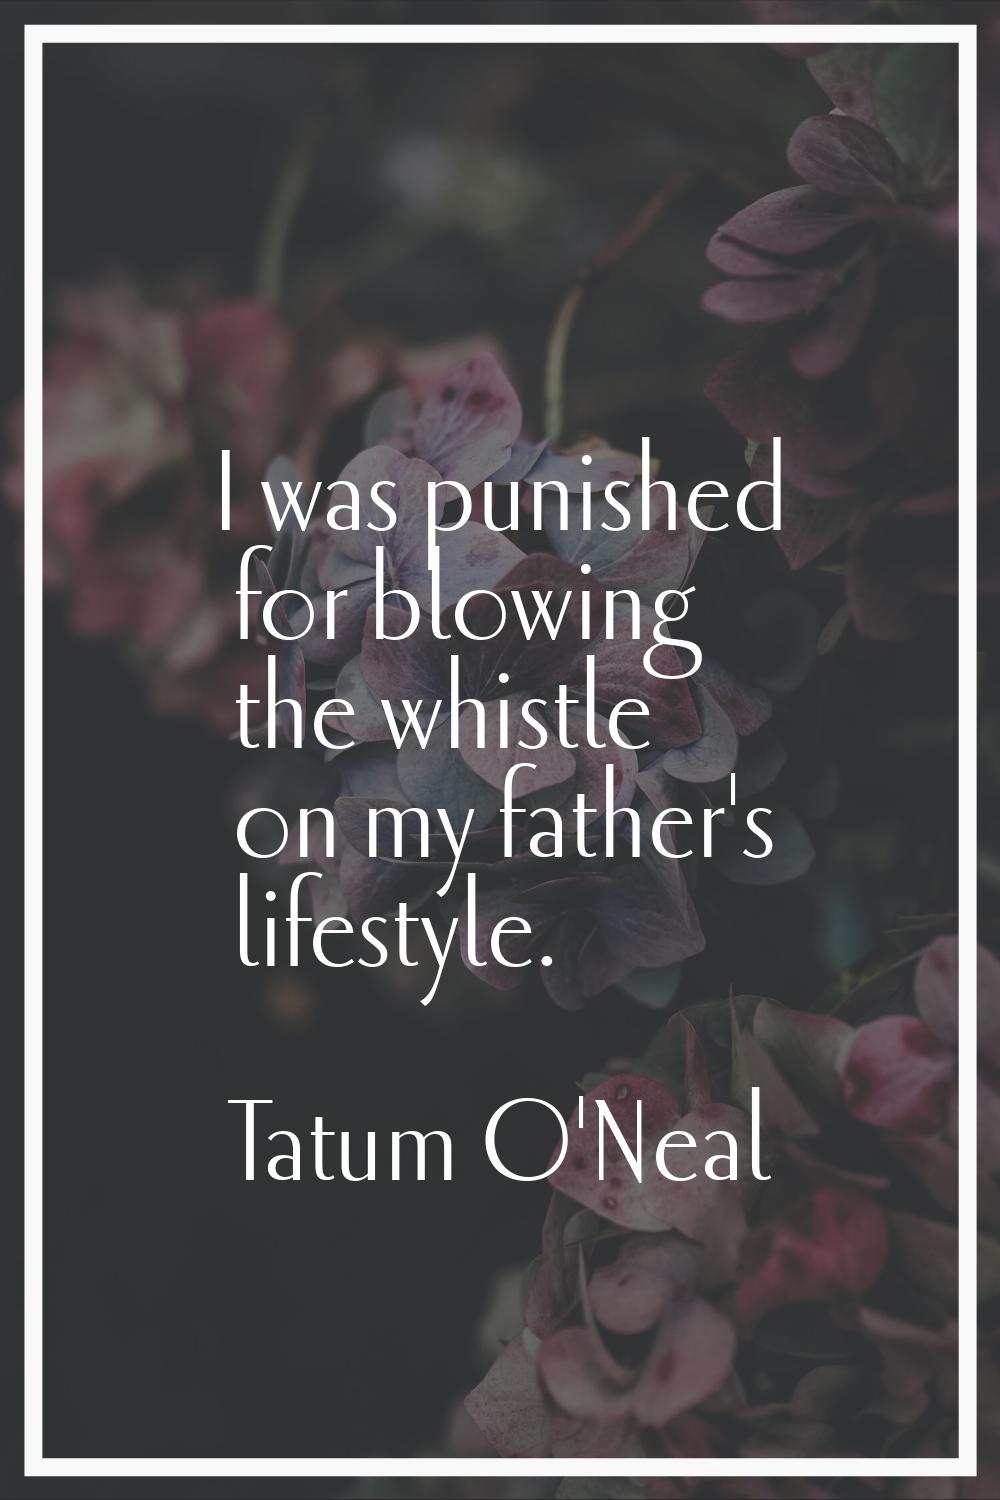 I was punished for blowing the whistle on my father's lifestyle.